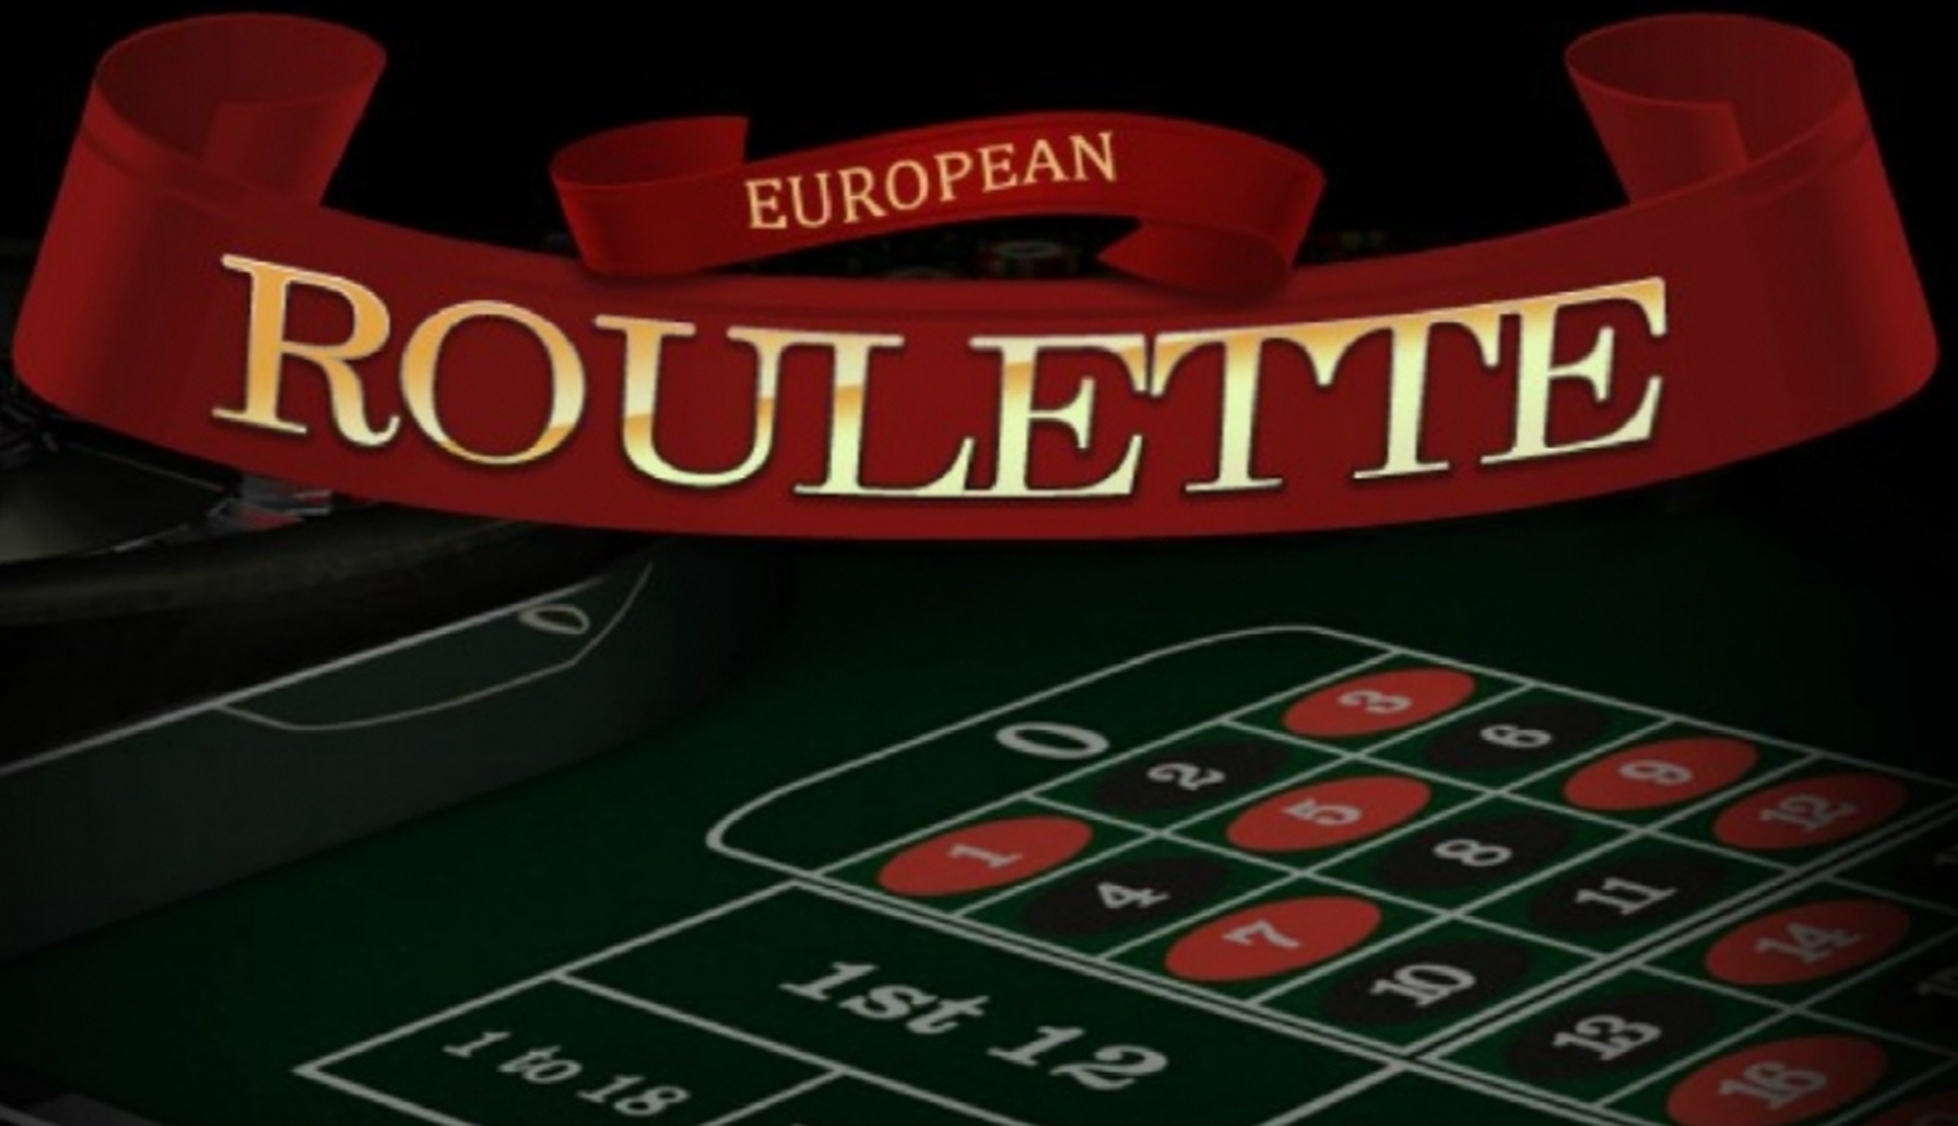 The European Roulette Online Slot Demo Game by 1x2 Gaming